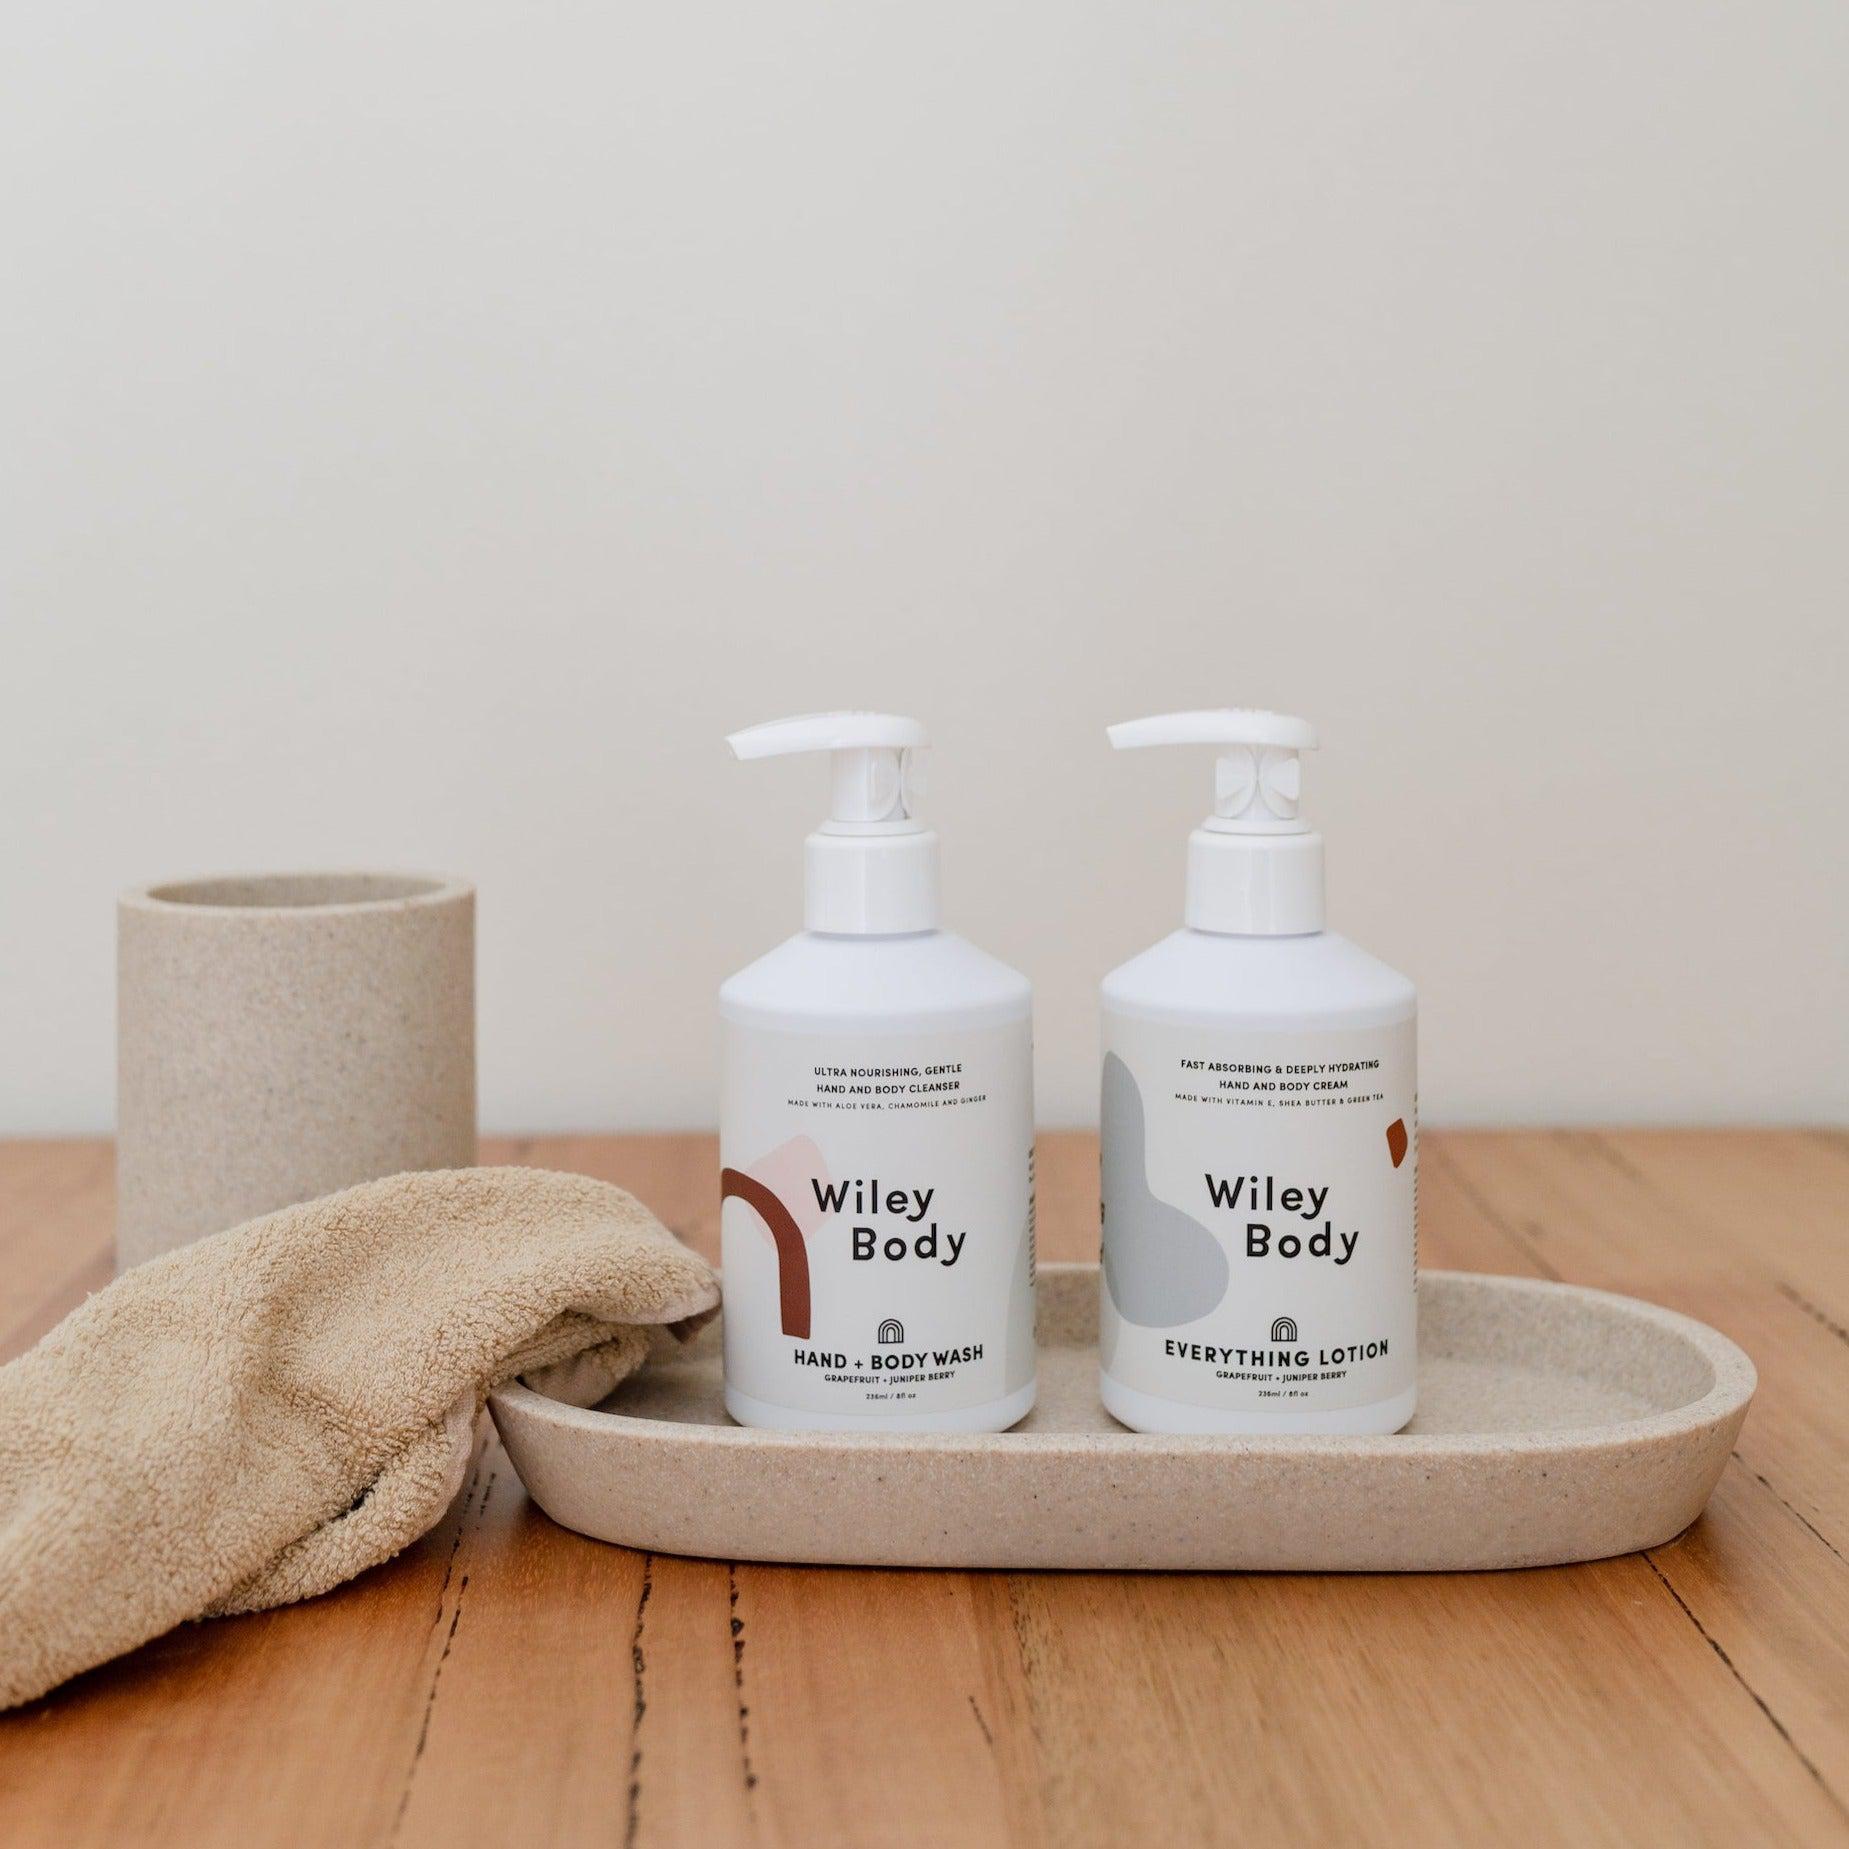 A lightweight bottle of Wiley Body's everything lotion and a towel on a wooden tray.